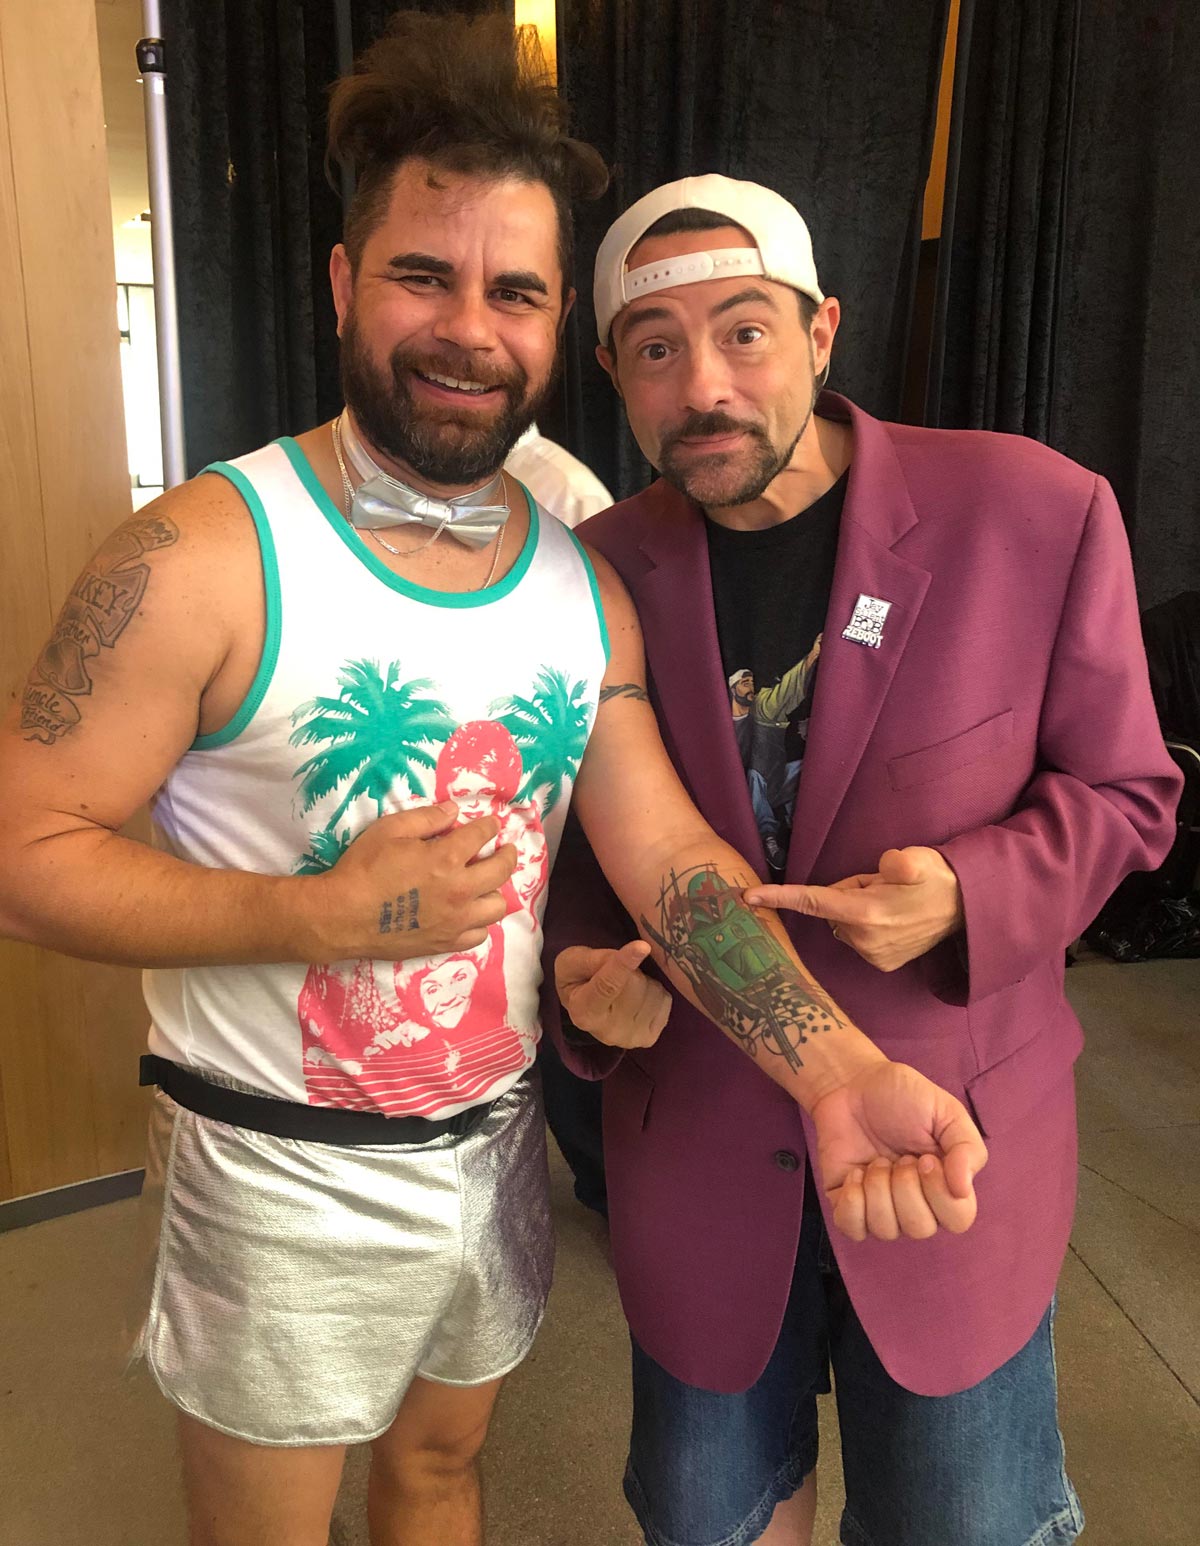 I am not sure if Kevin Smith getting a picture with my tattoo was funnier than my outfit. My girlfriend and I were at DayBreaker event just to be clear